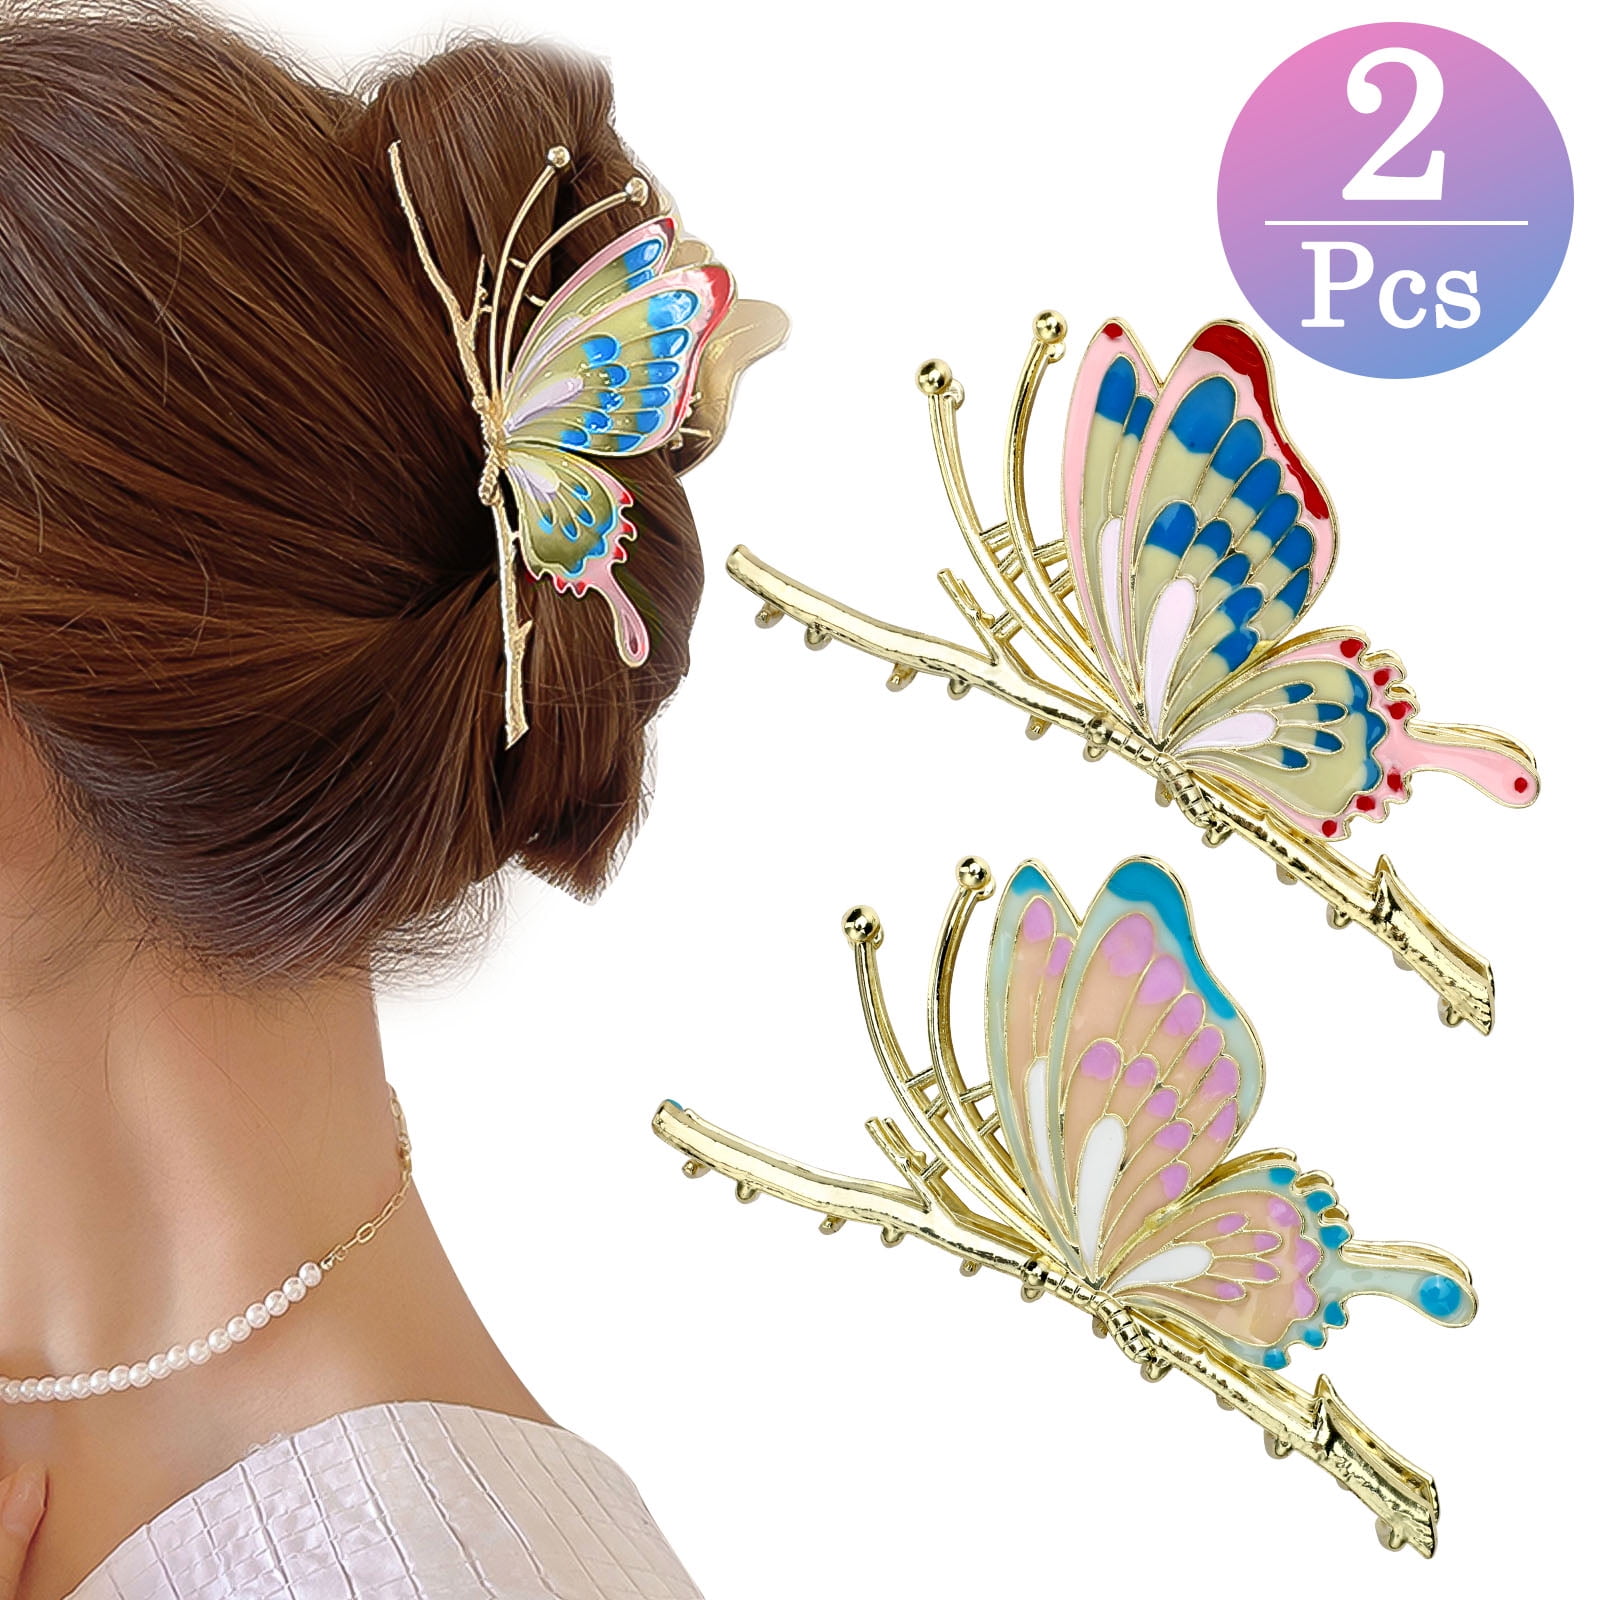 Buy Aiwanto Hair Pin Hair Clips Beautiful Star Hair Clips Stylish Hair  Accessories For Girls Kids (2Pcs) Online - Shop Beauty & Personal Care on  Carrefour UAE